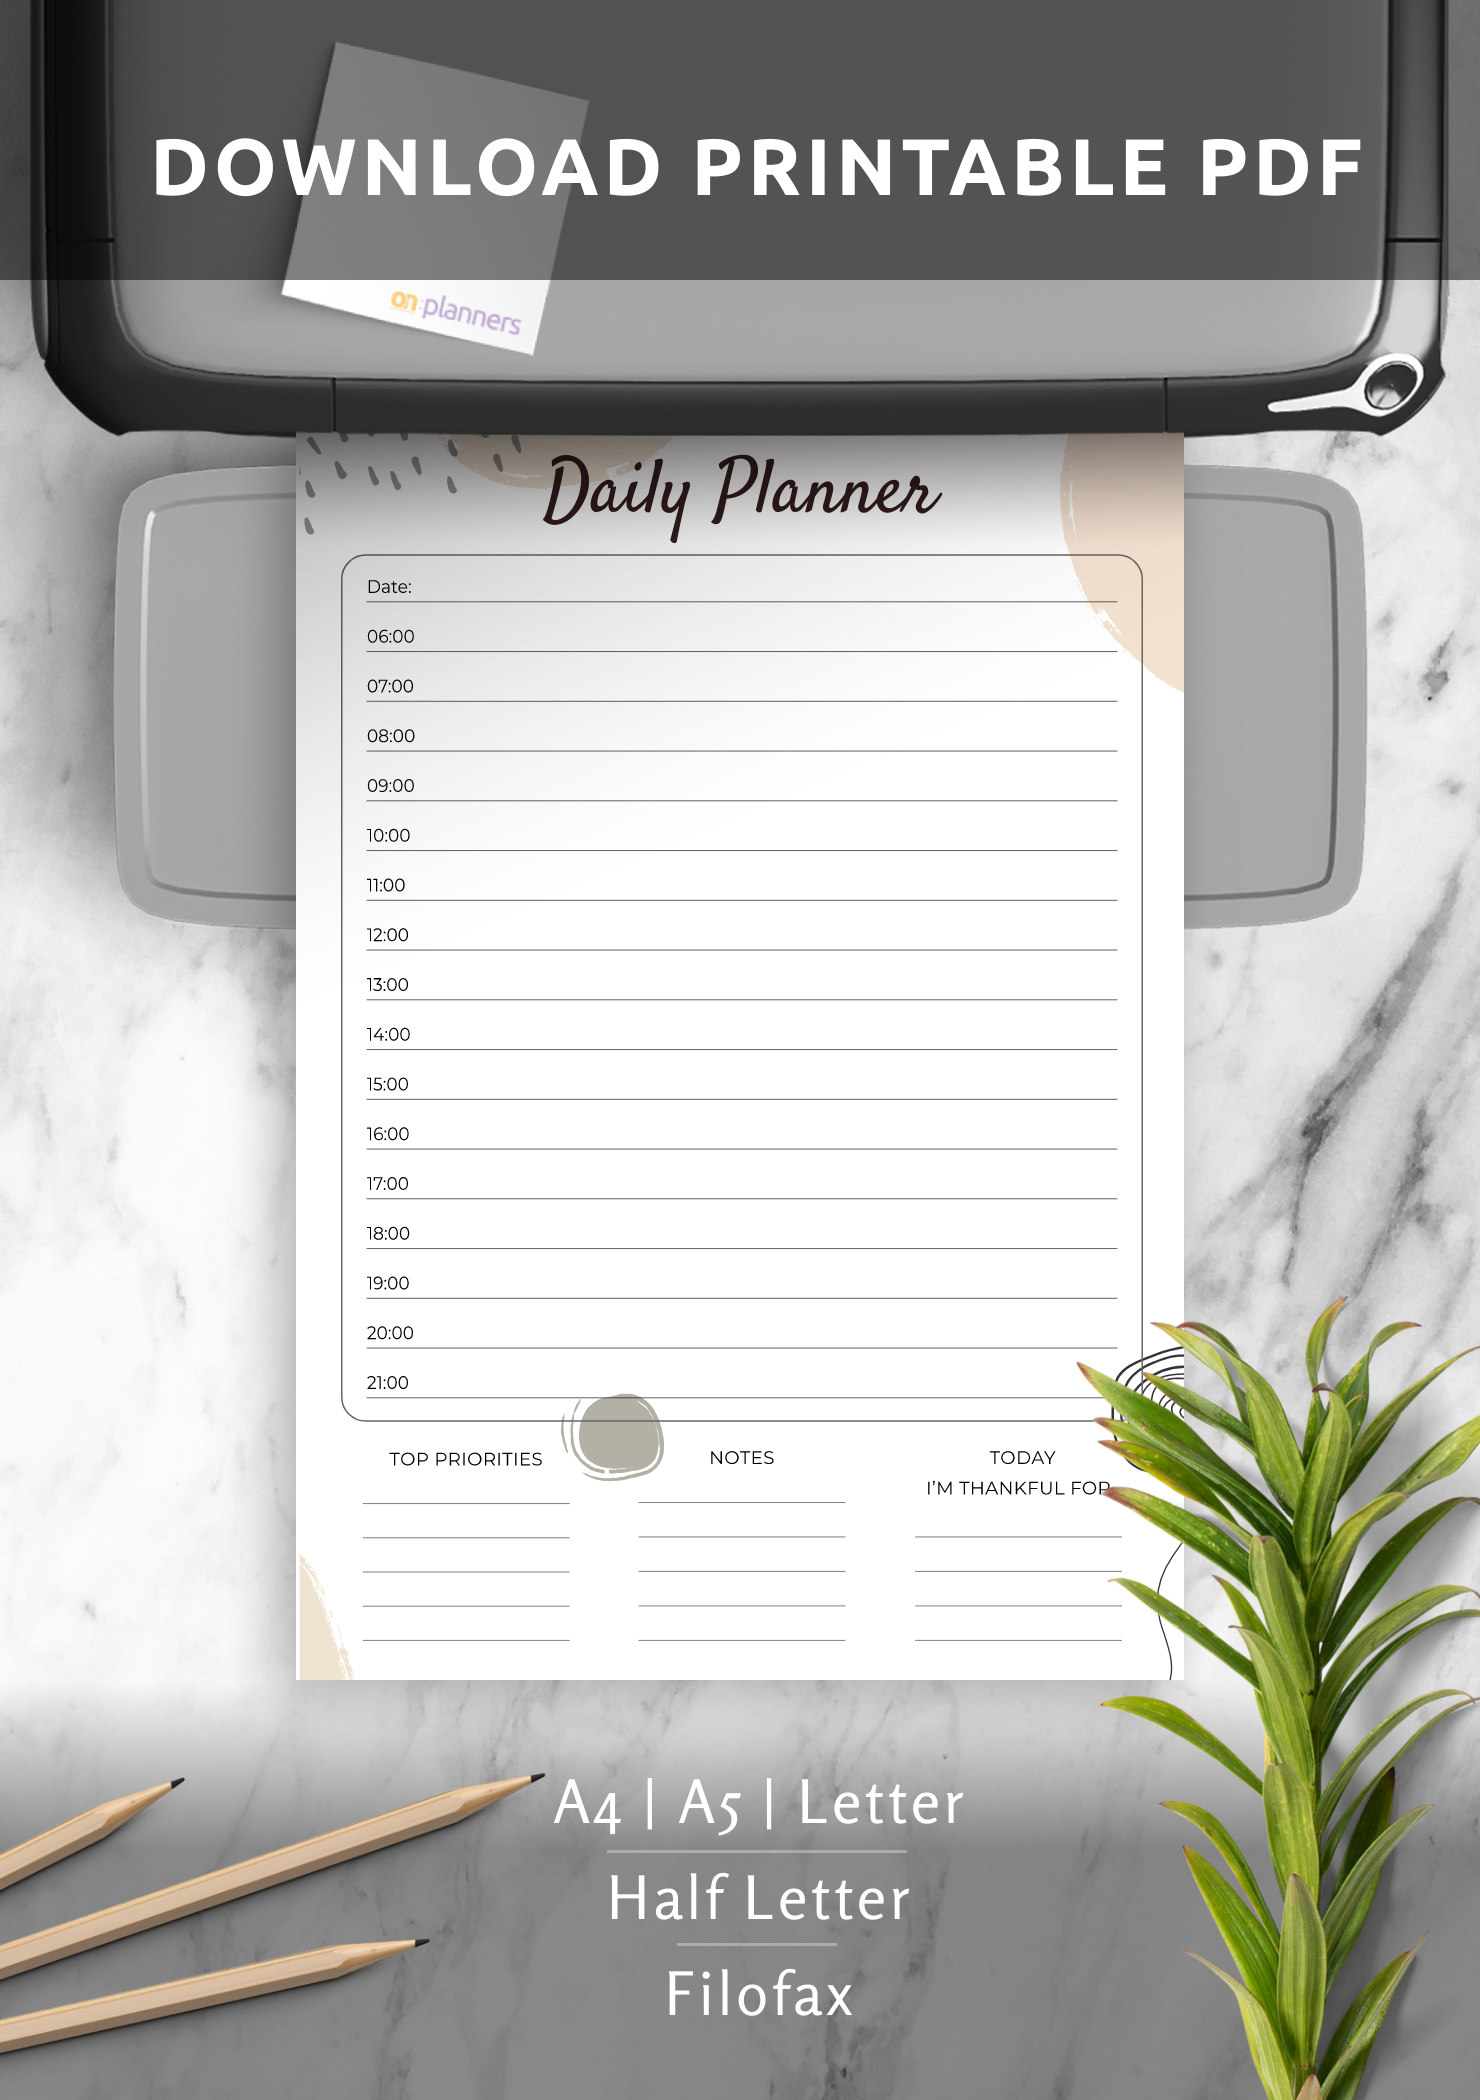 download-printable-daily-planner-with-time-slots-template-pdf